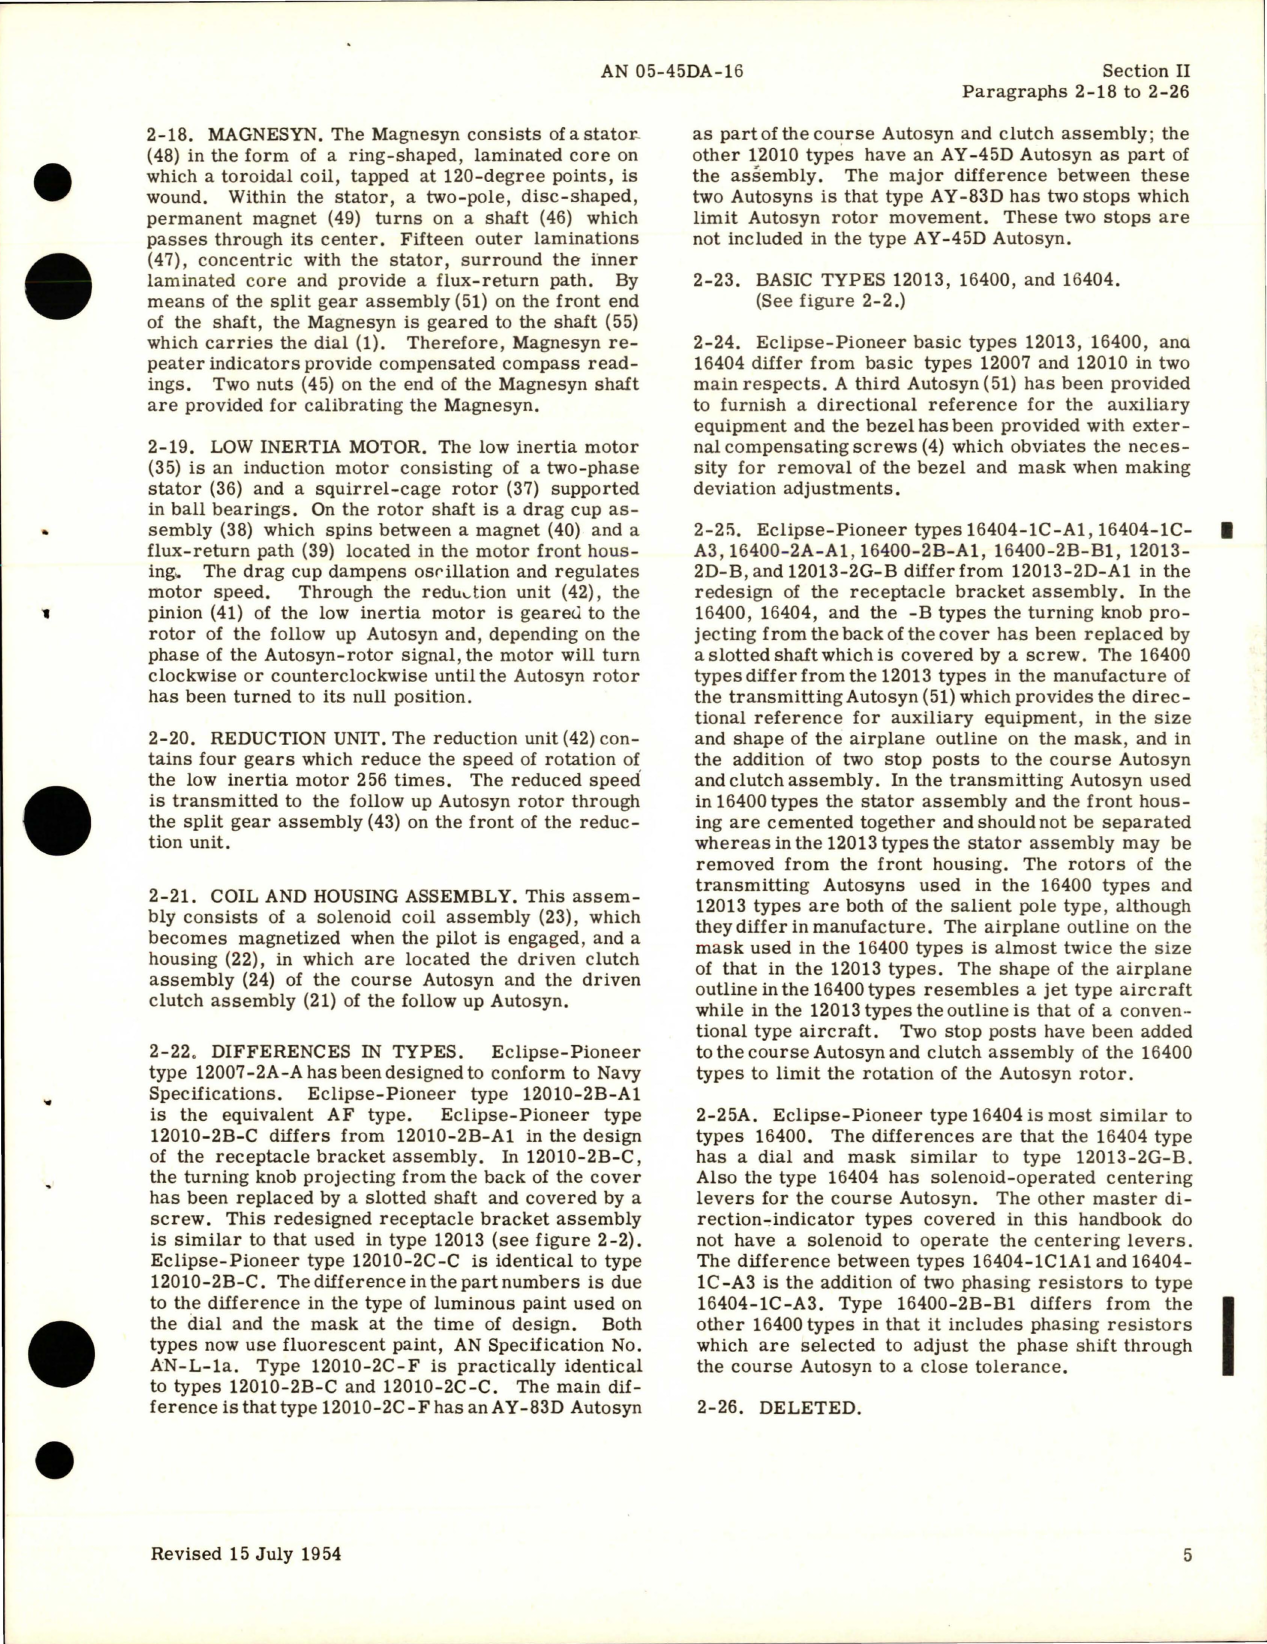 Sample page 9 from AirCorps Library document: Overhaul Instructions for Master Direction Indicators